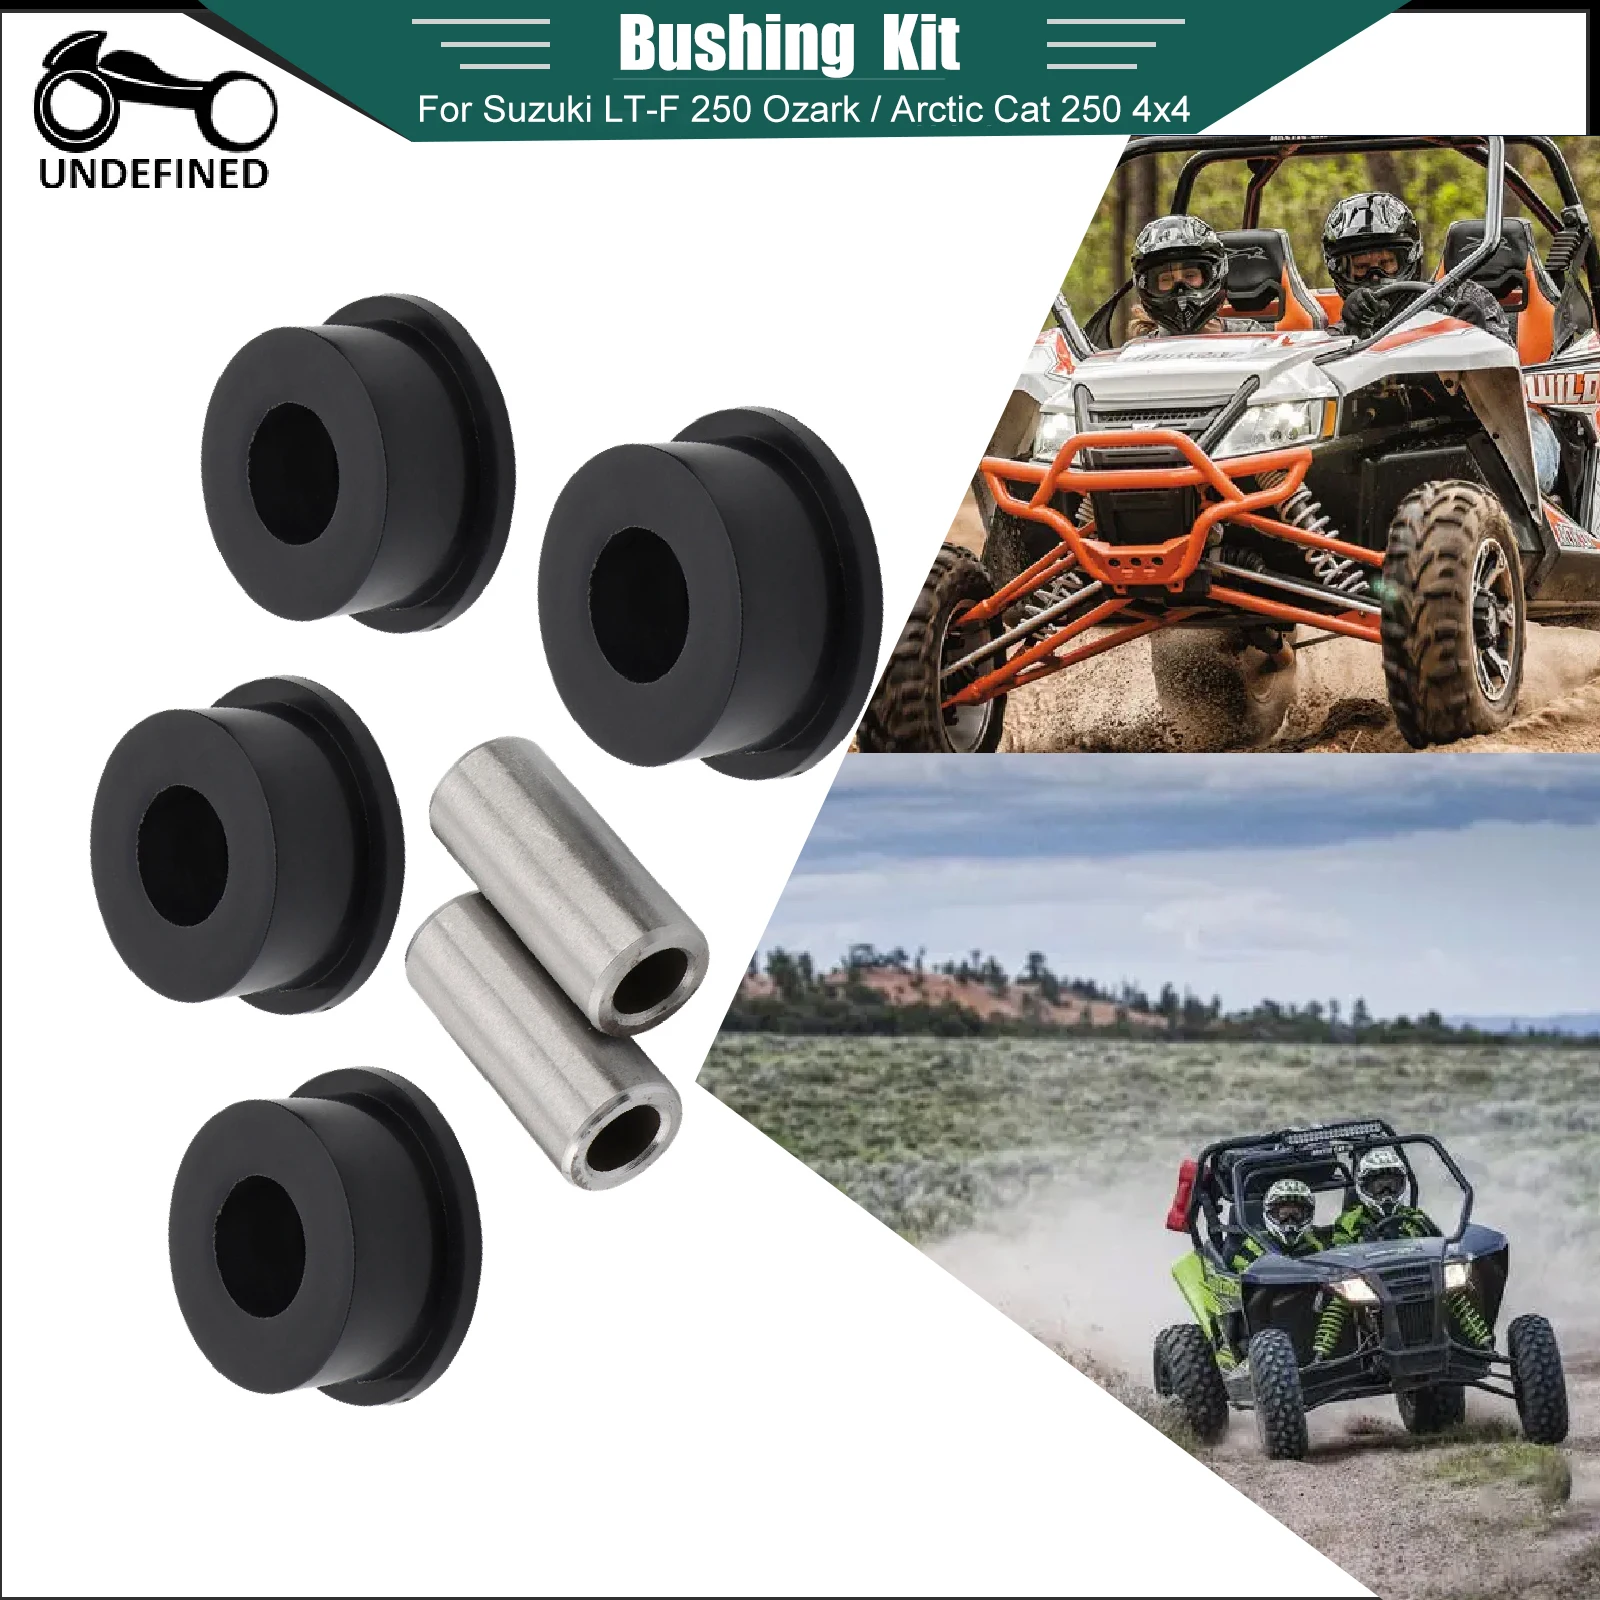 

Suspension Control Swing Upper Lower Front A-Arm Bushings Kit For Arctic Cat 250 400 TBX 4x4 for Suzuki LT-F 750 King Quad Std